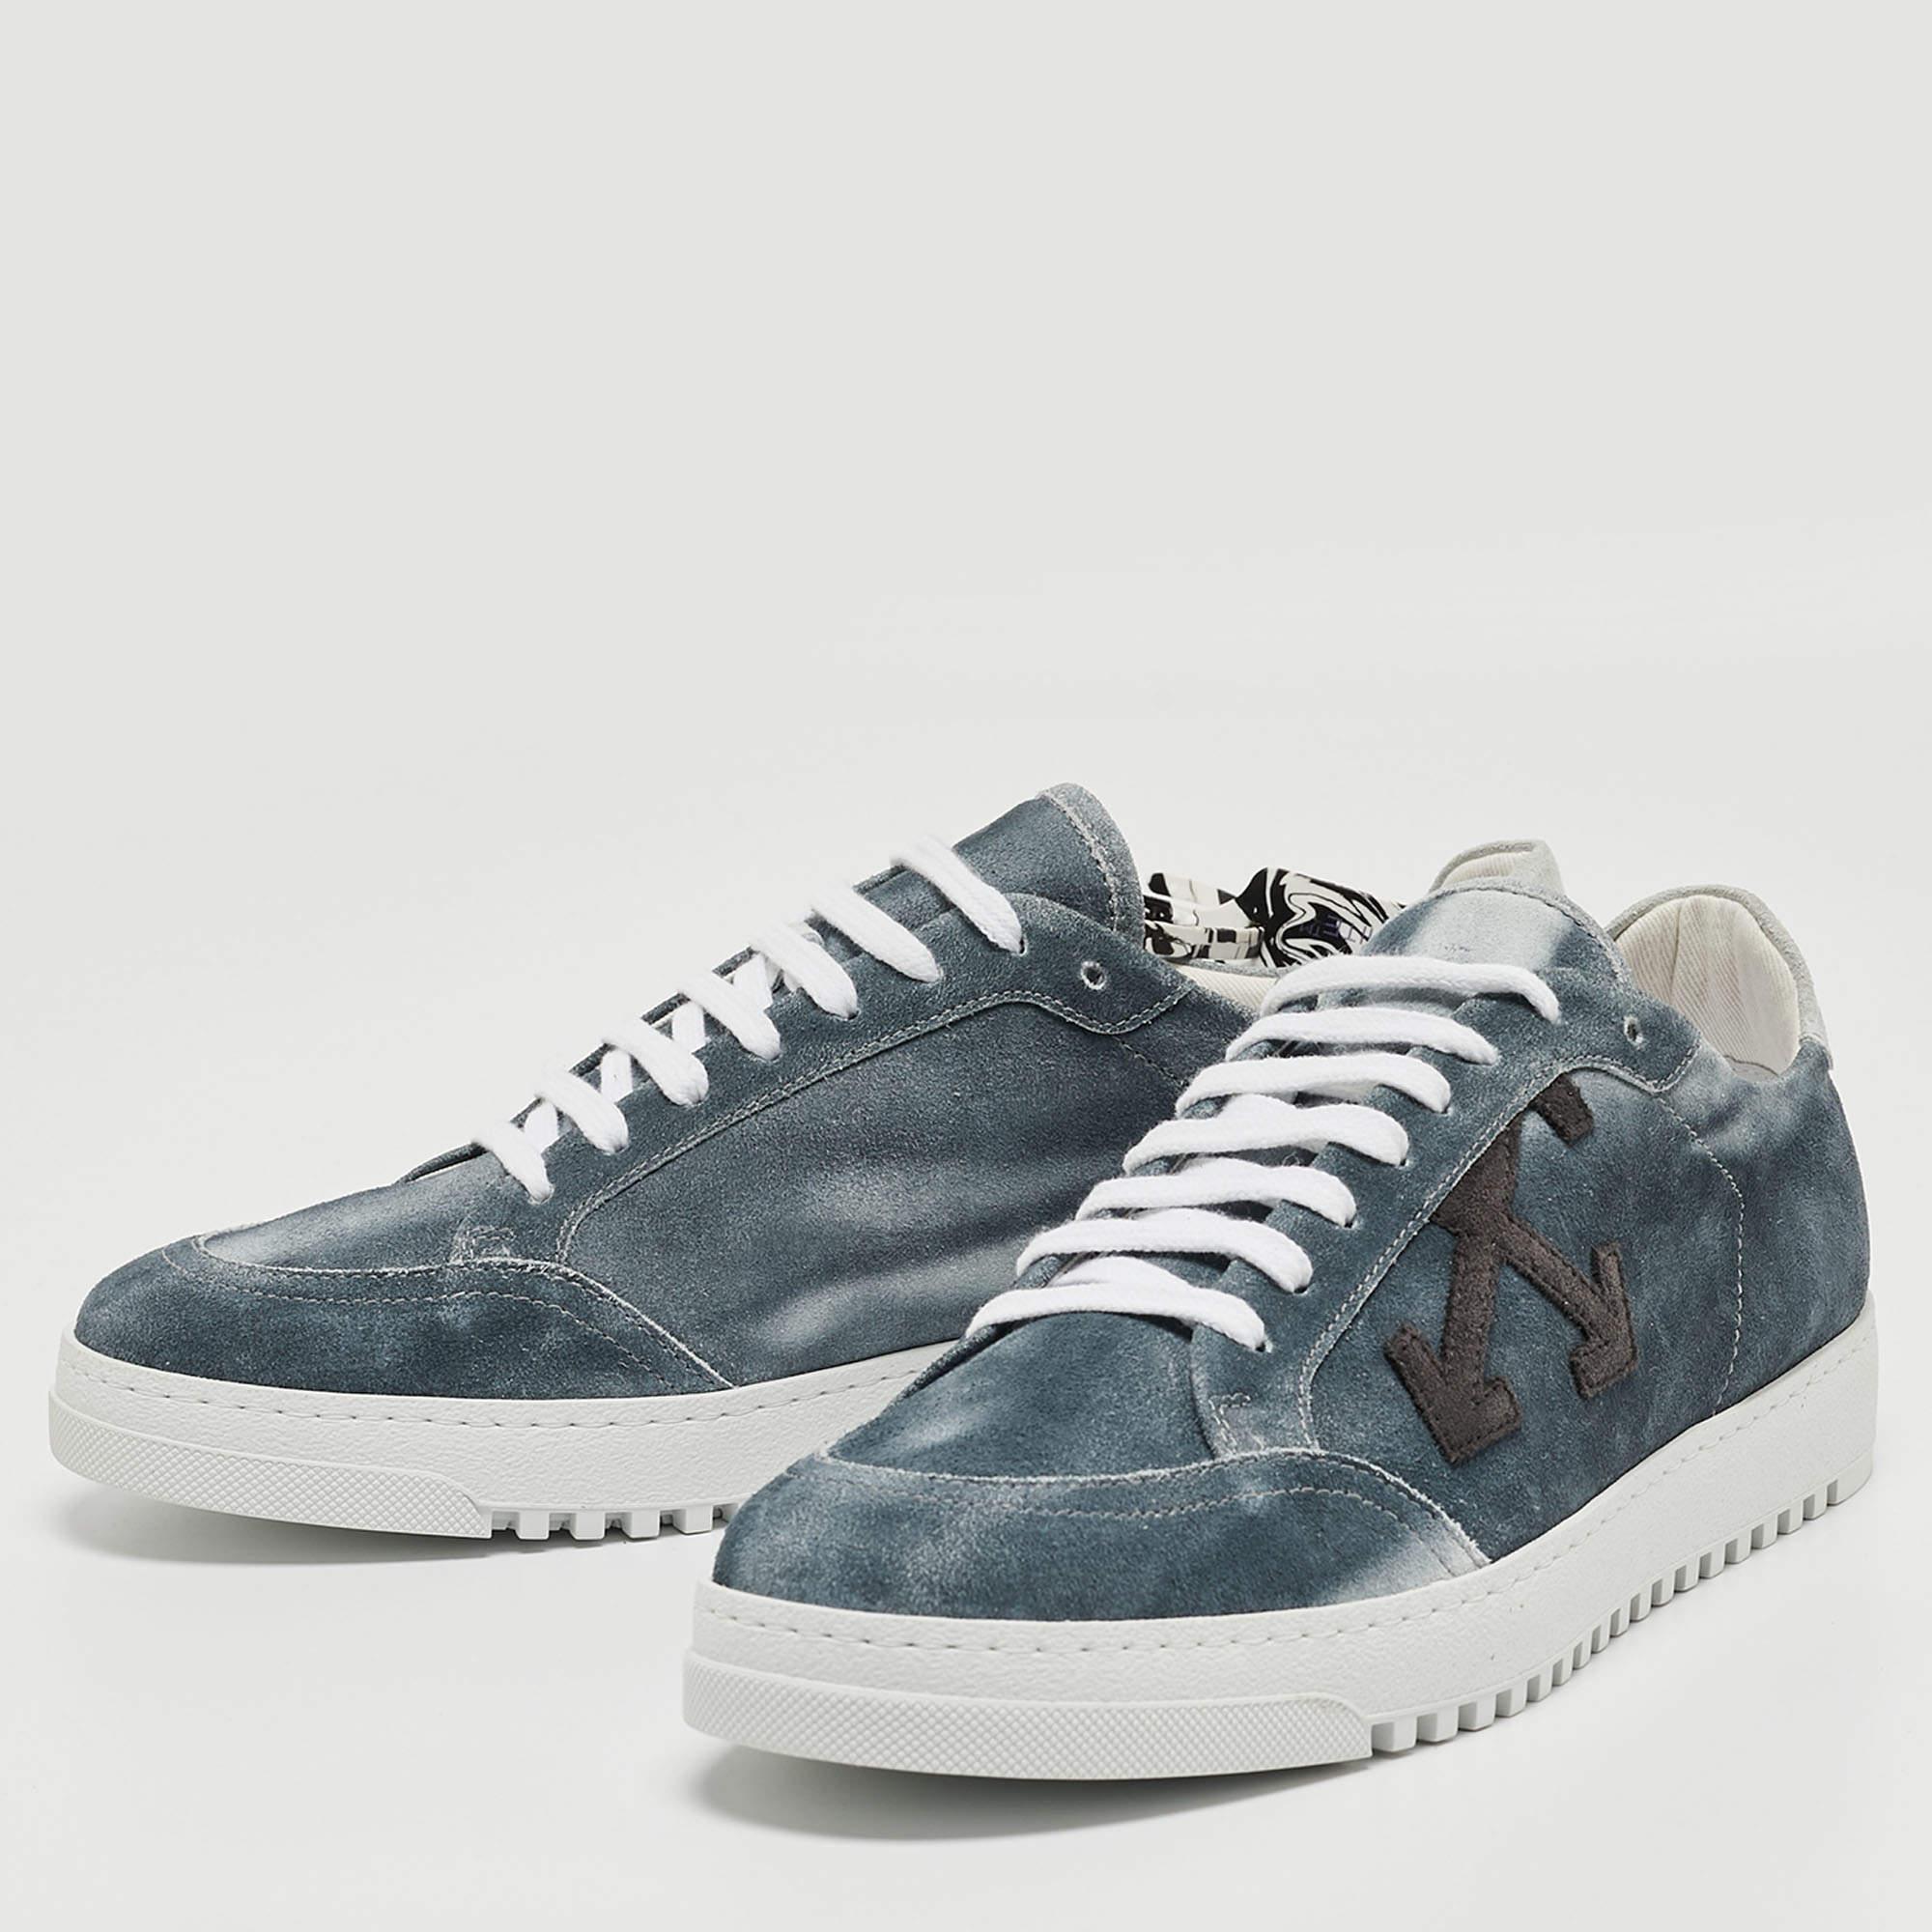 Off-White Blue/Grey Suede 2.0 Low Top Sneakers Size 41 For Sale 1